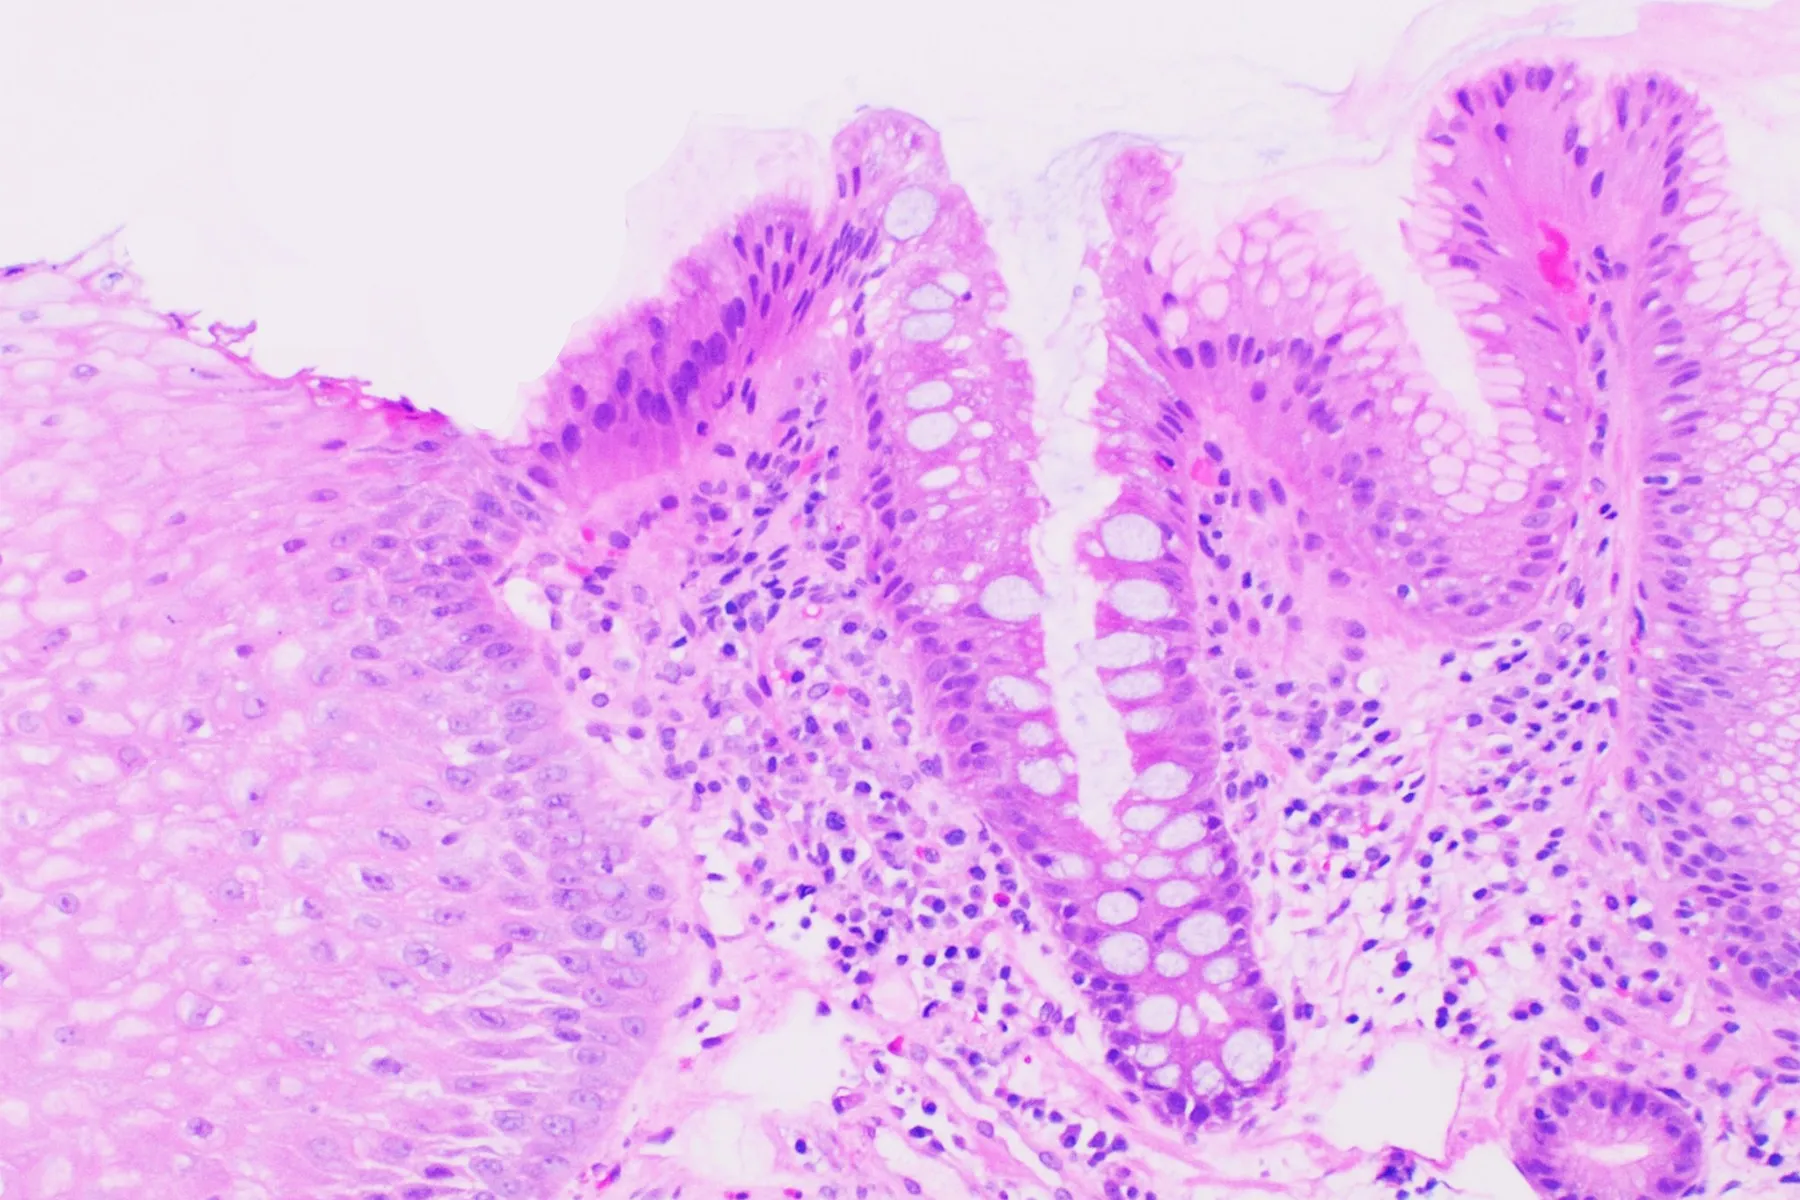 A microscope image showing cells affected by Barrett's oesophagus, a precancer that can lead to oesophageal cancer.